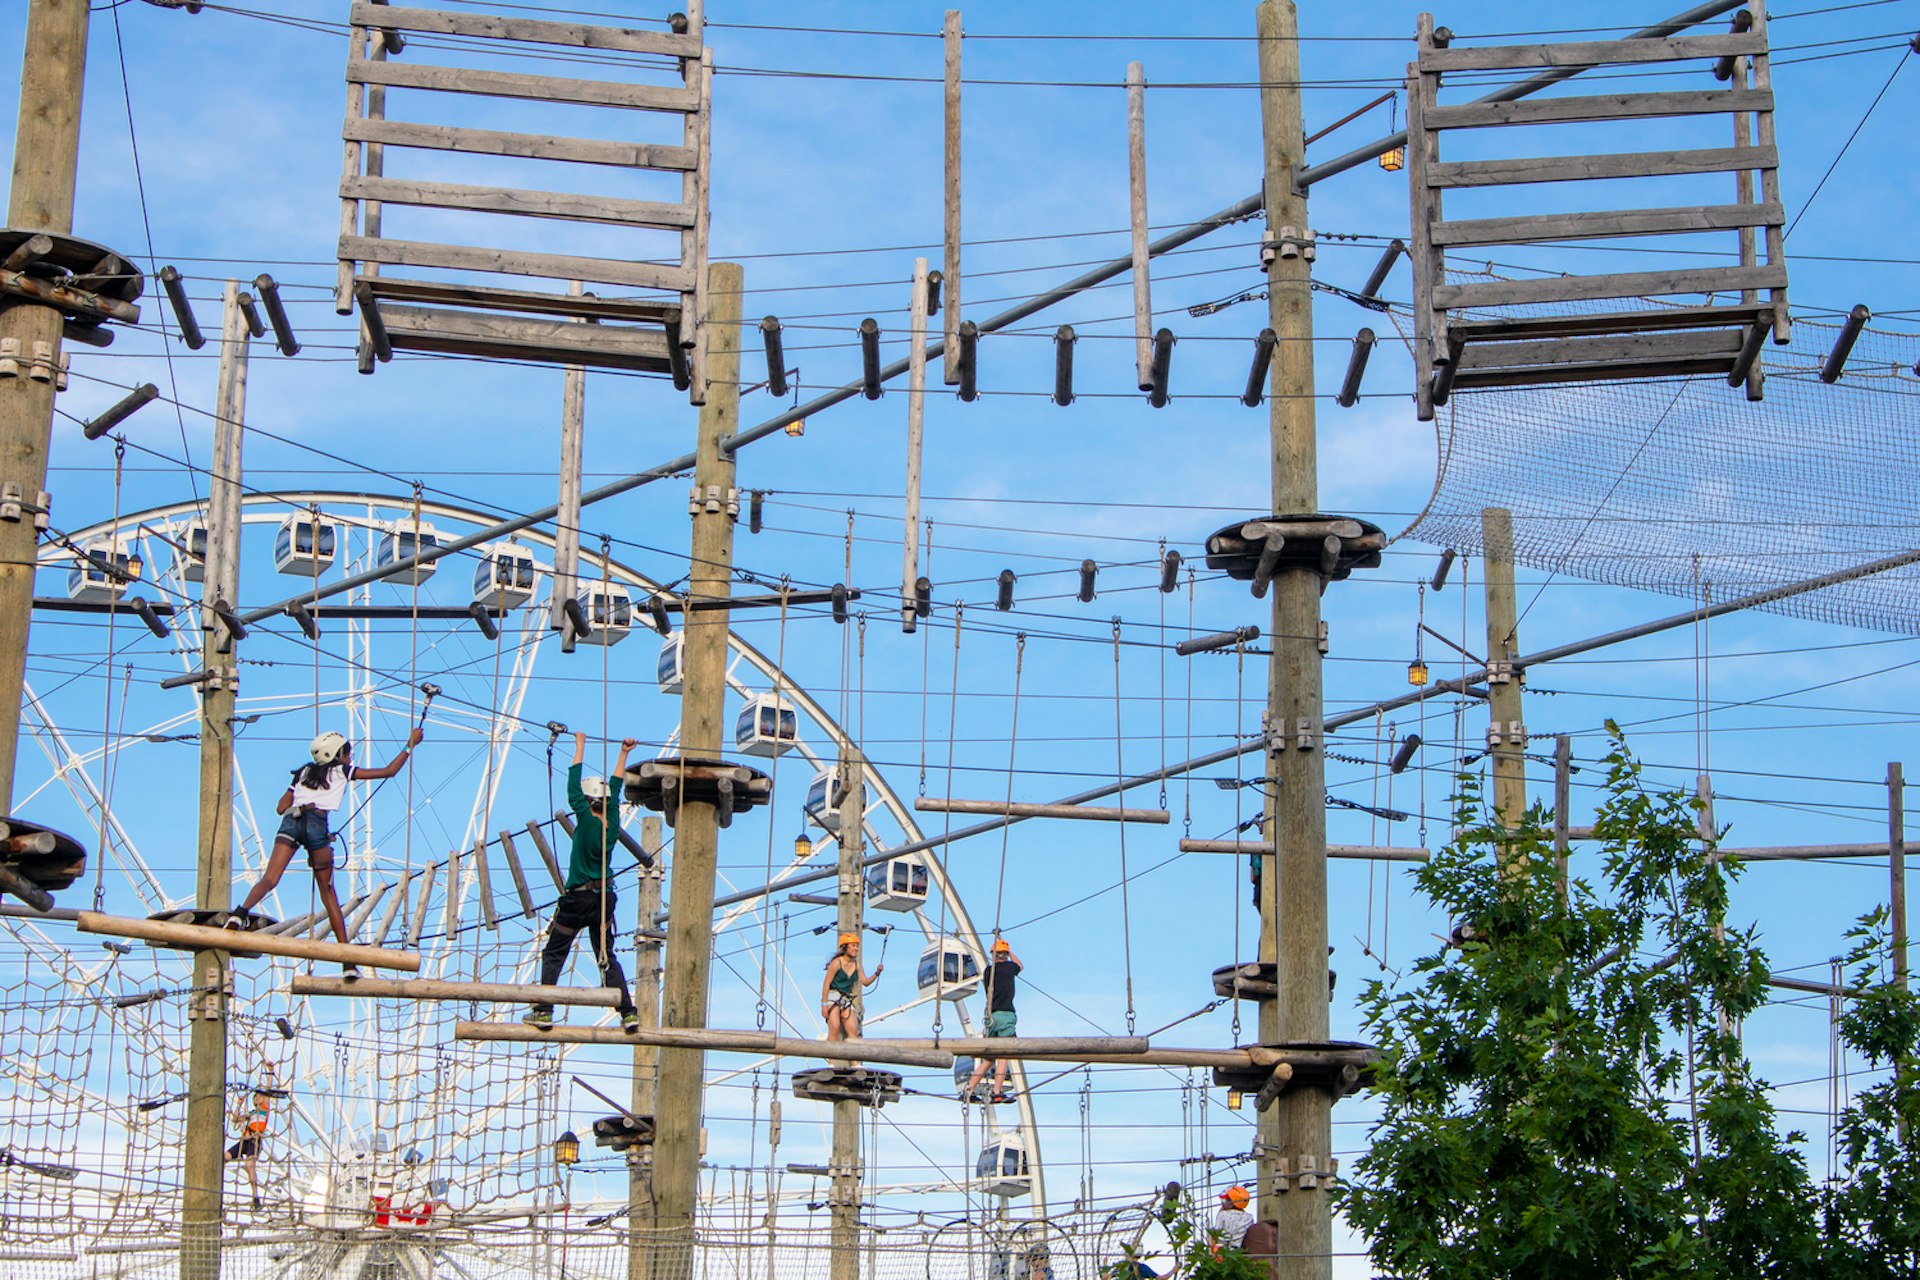 Kids on harnesses negotiate their way over an obstacle course on high-up ropes